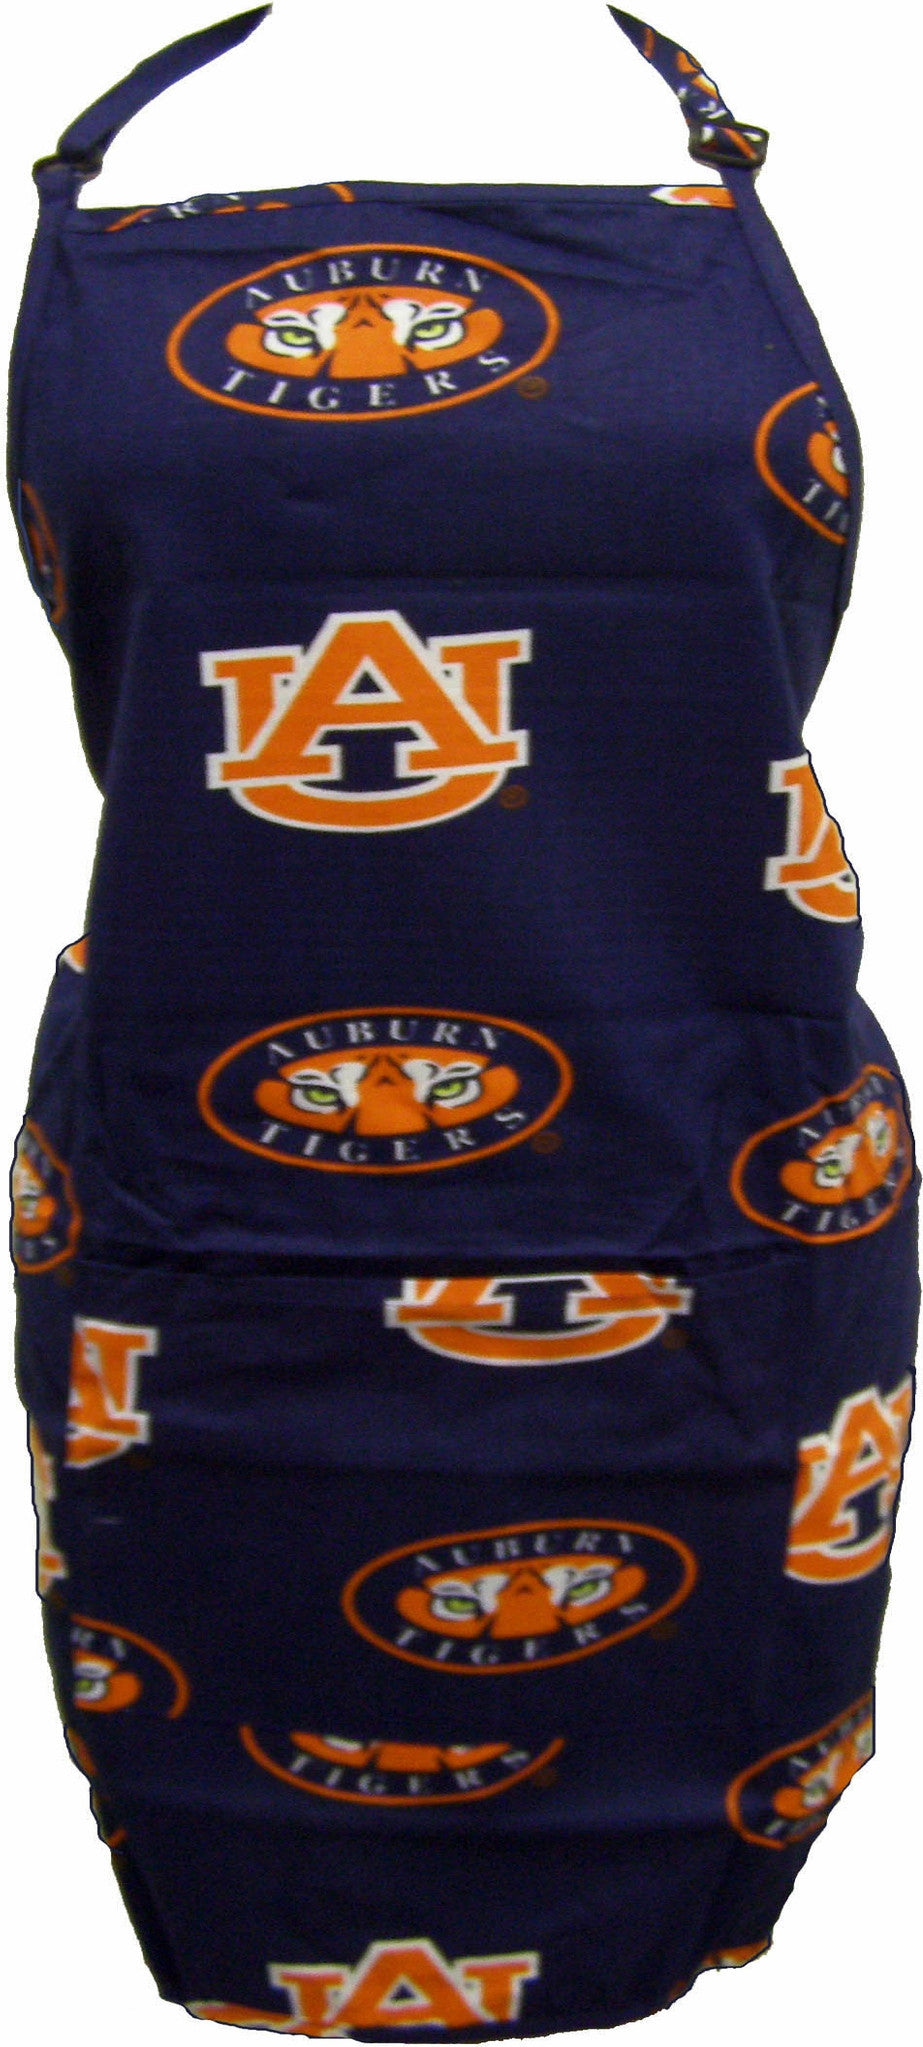 Auburn Apron 26"x35" With 9" Pocket - Aubapr By College Covers